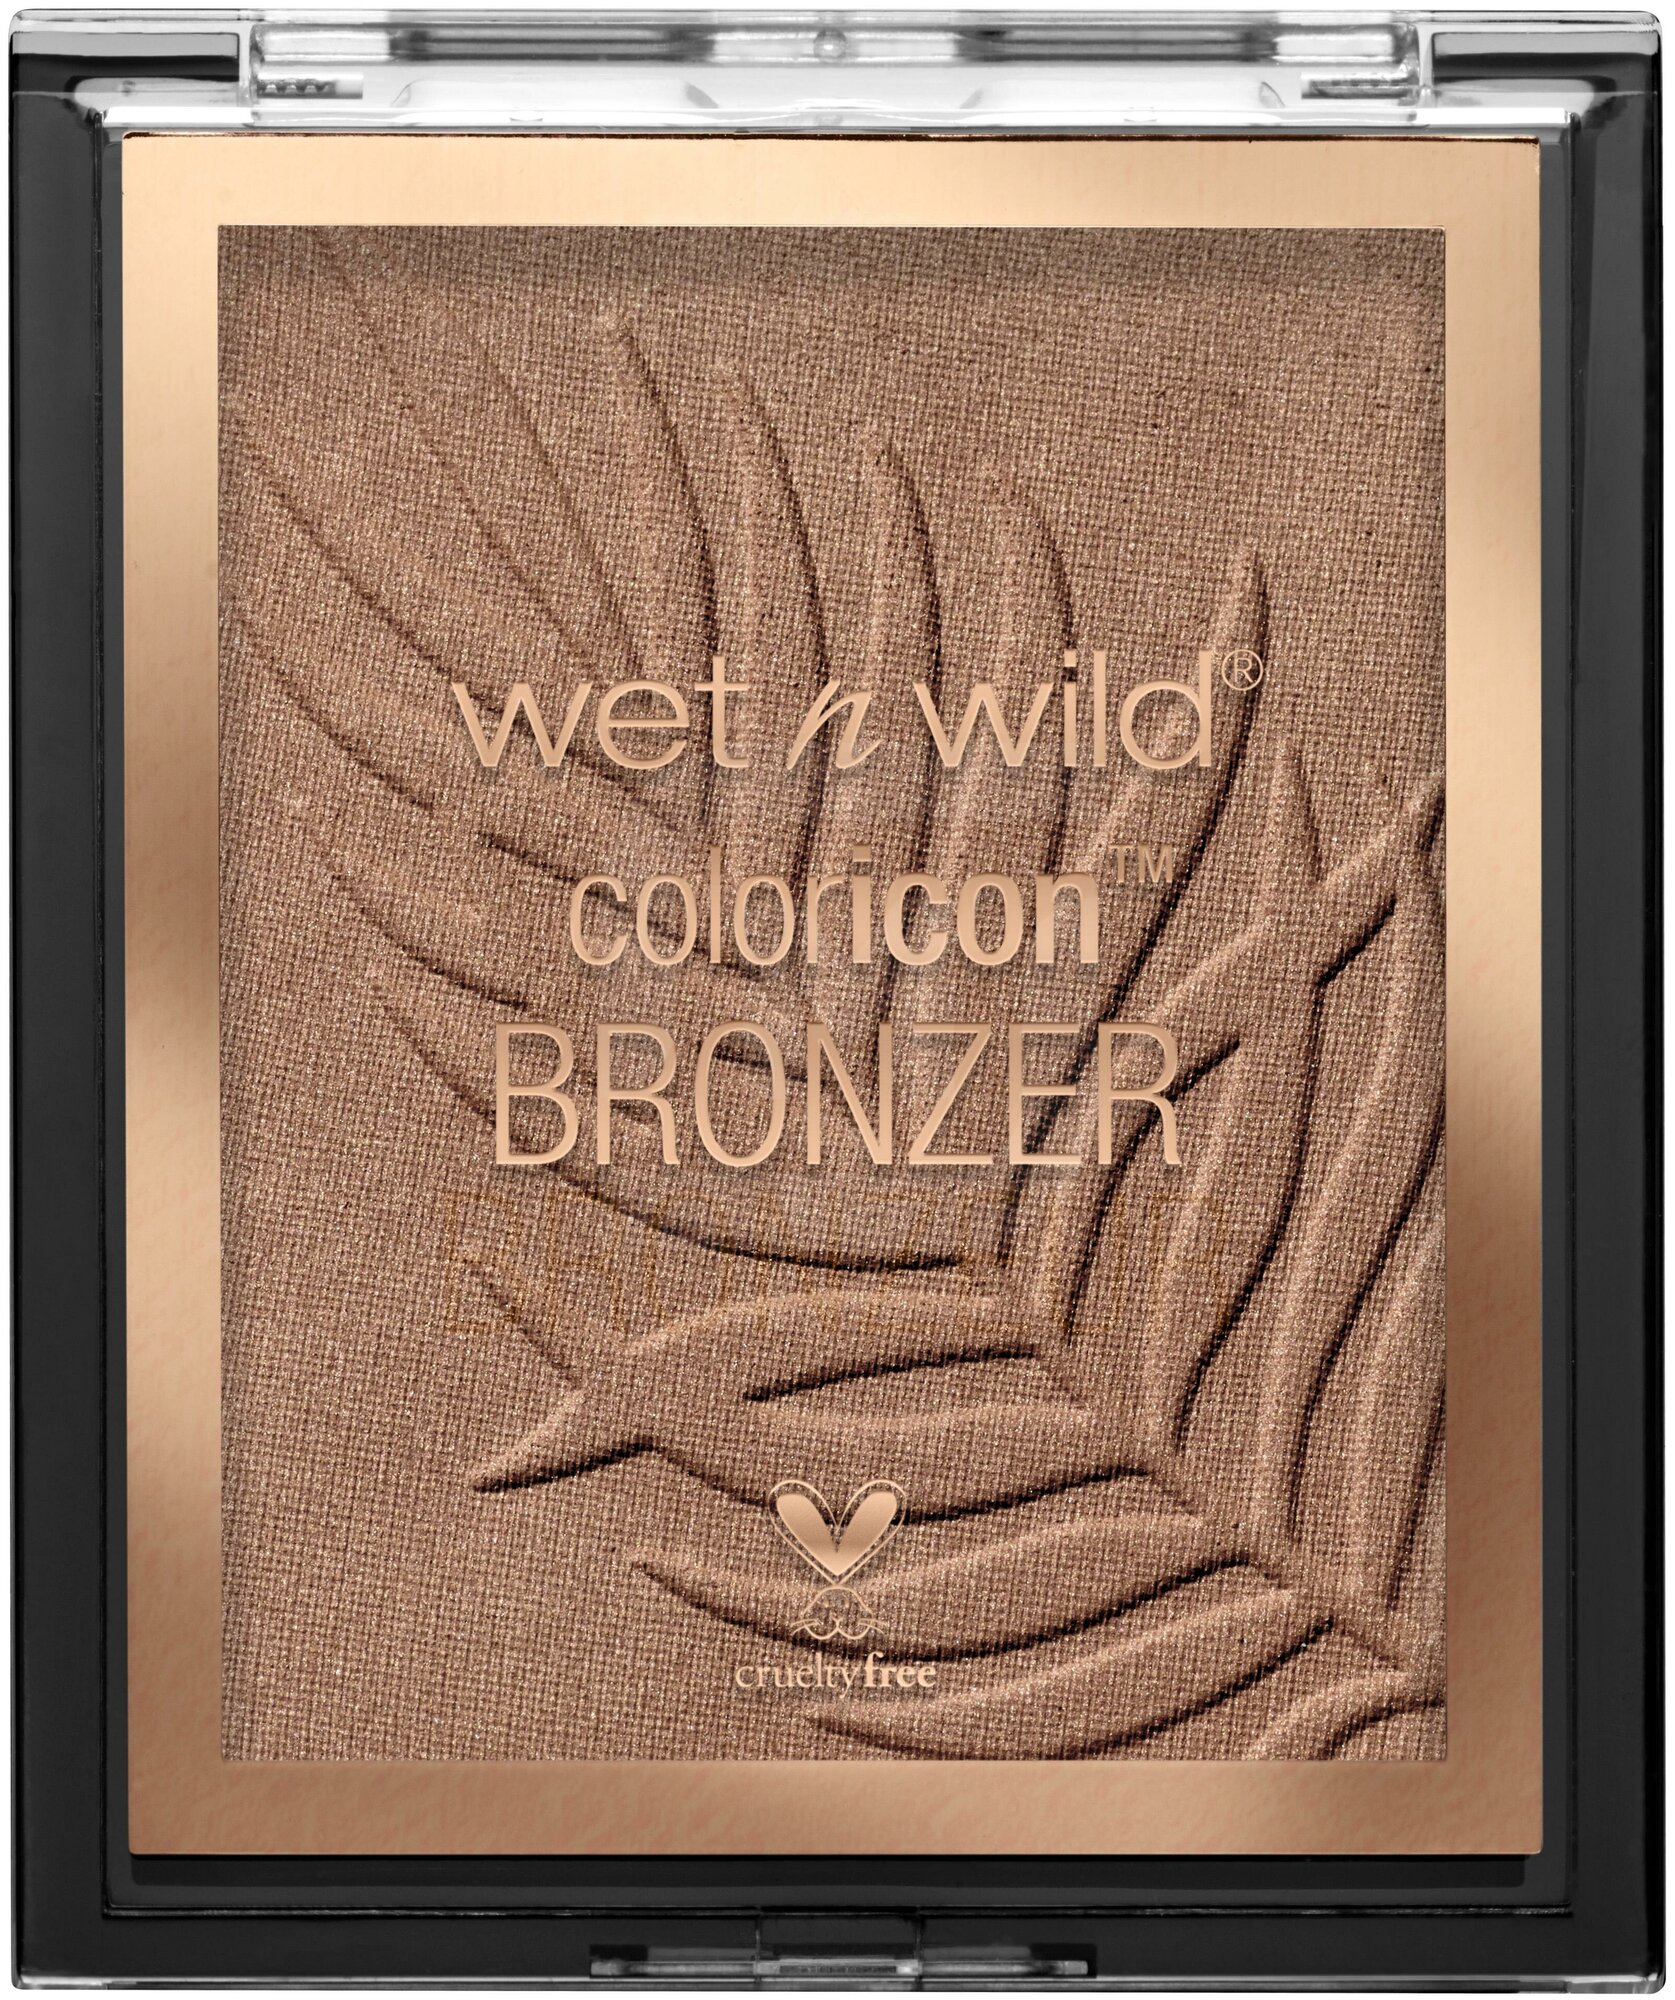 Wet n Wild Color Icon Bronzer Товар Бронзирующая пудра для лица ticket to brazil, 11 gr Markwins Beauty Products CN - фото №8